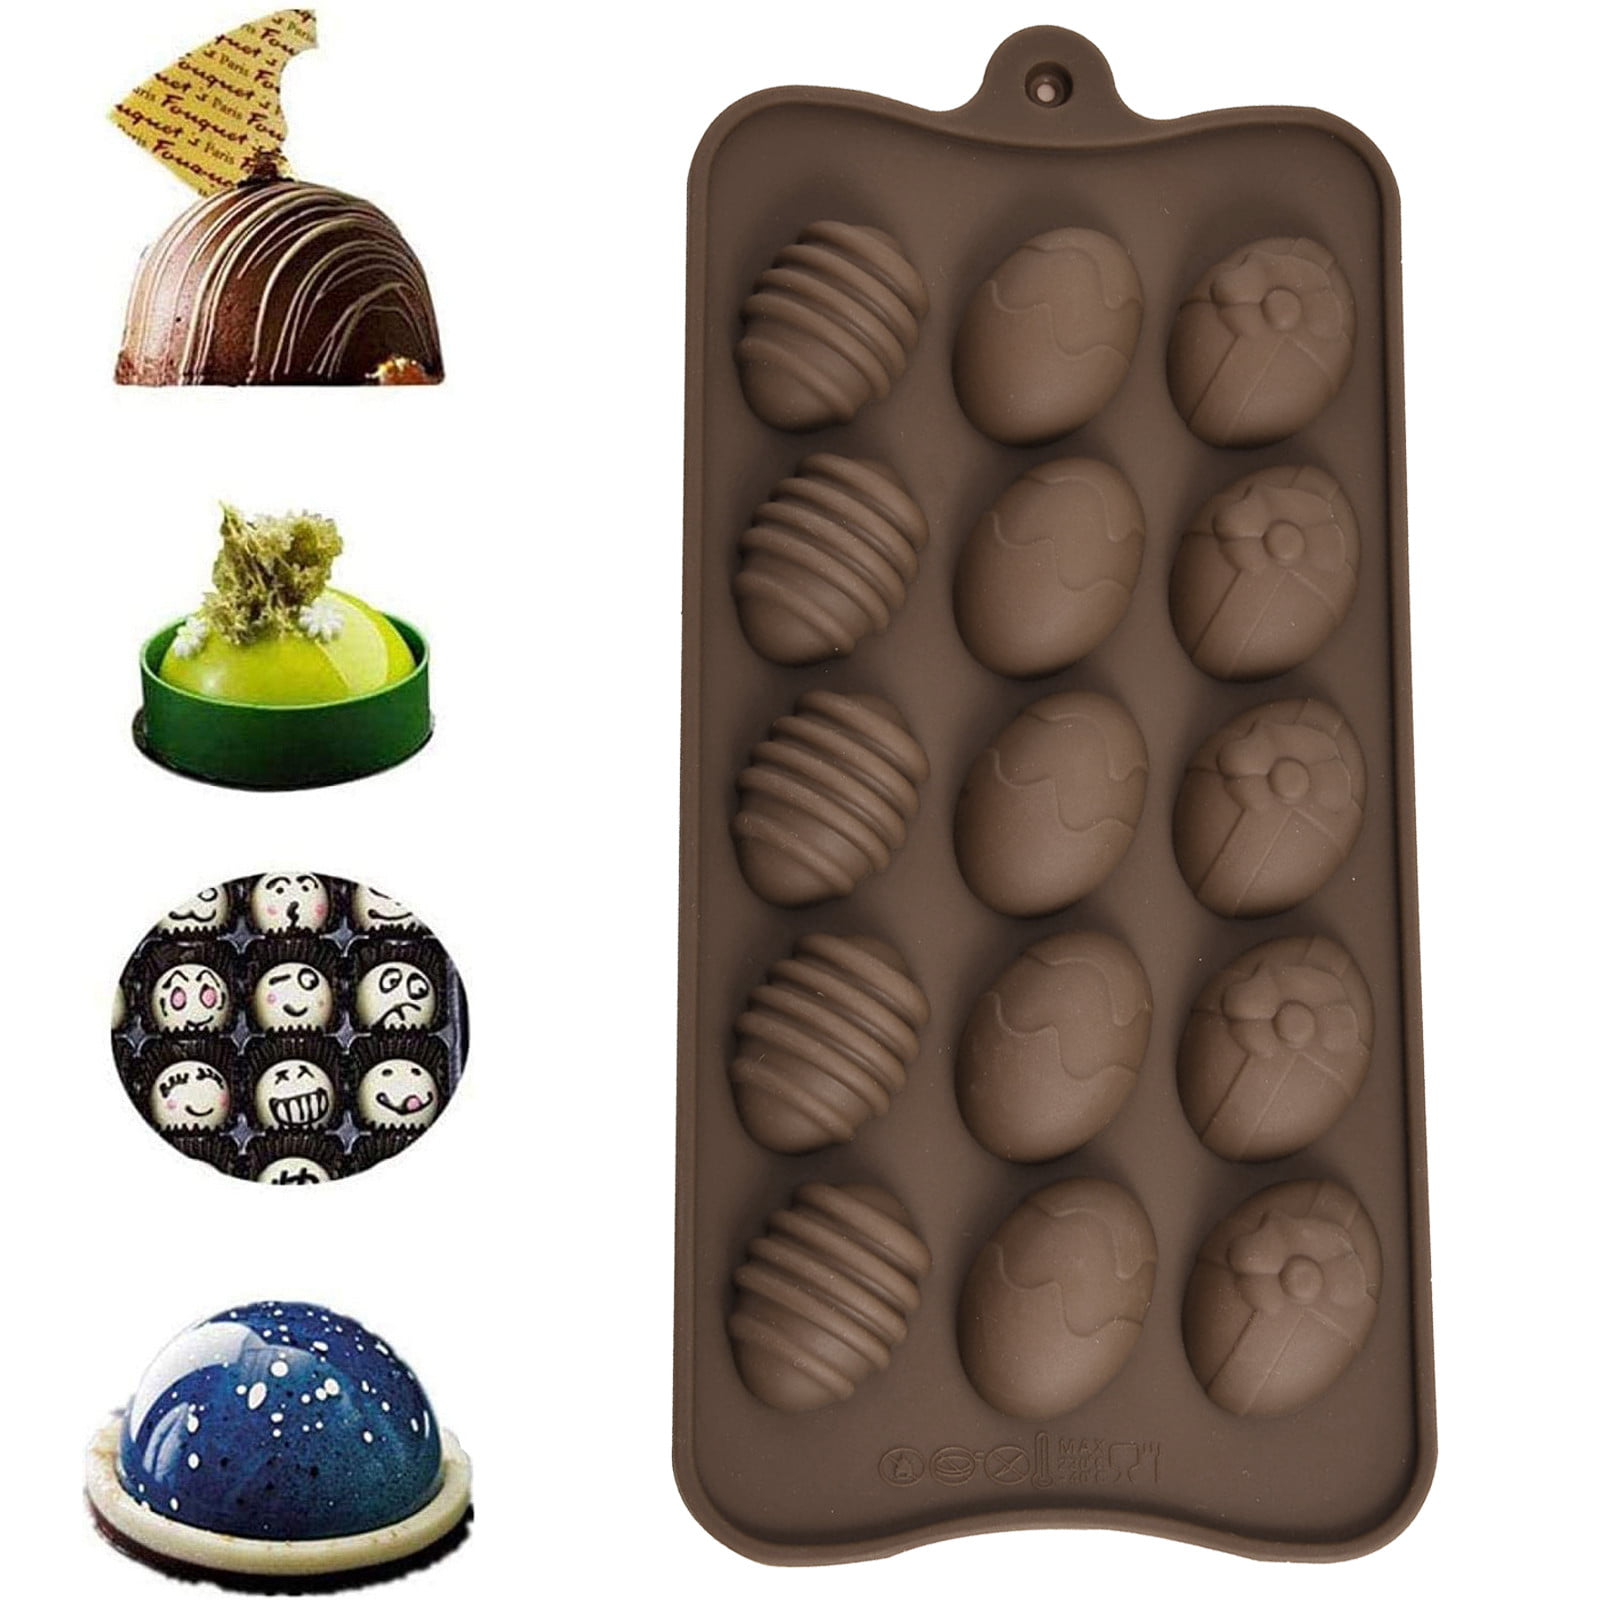 Egg Soap Mould Silicone Candle Making Tools Cake Baking DIY Chocolate Candy 